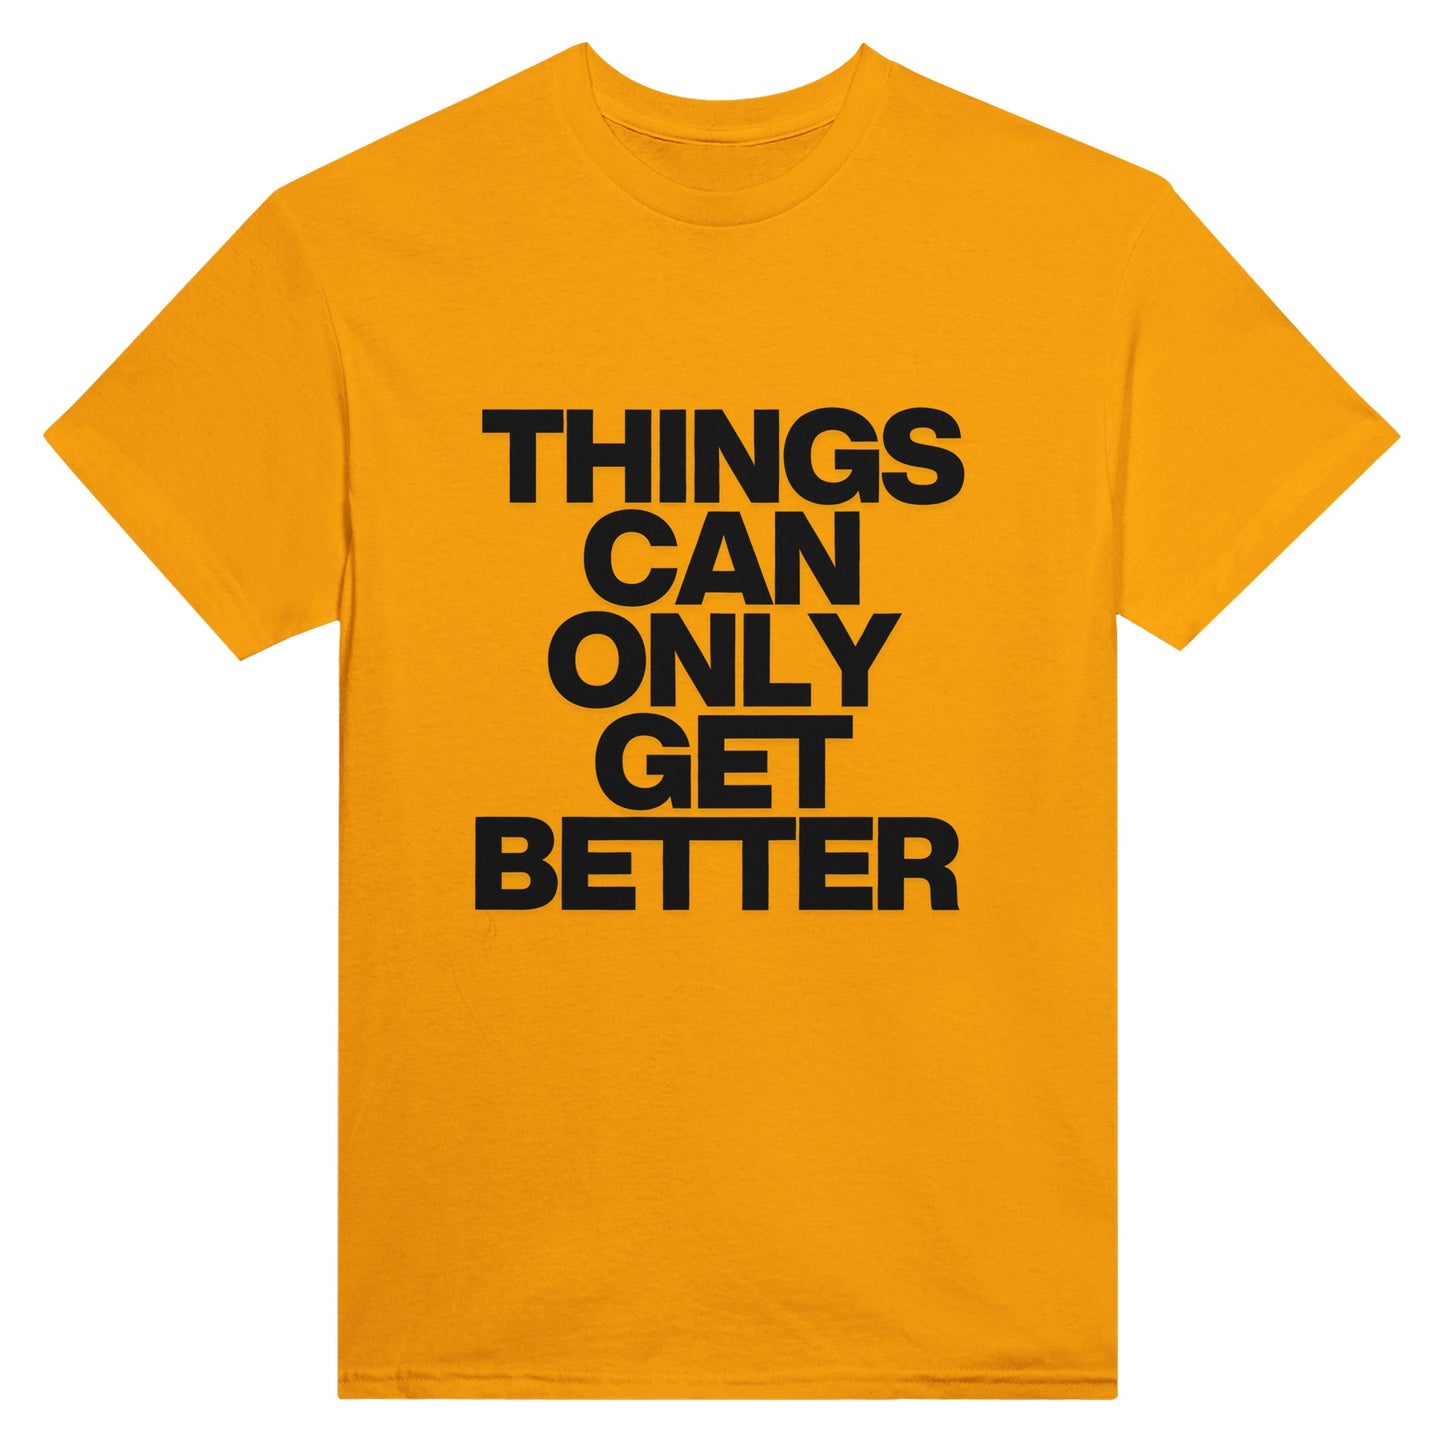 Things Can Only Get Better T-shirt in yellow - anti-tory election wear